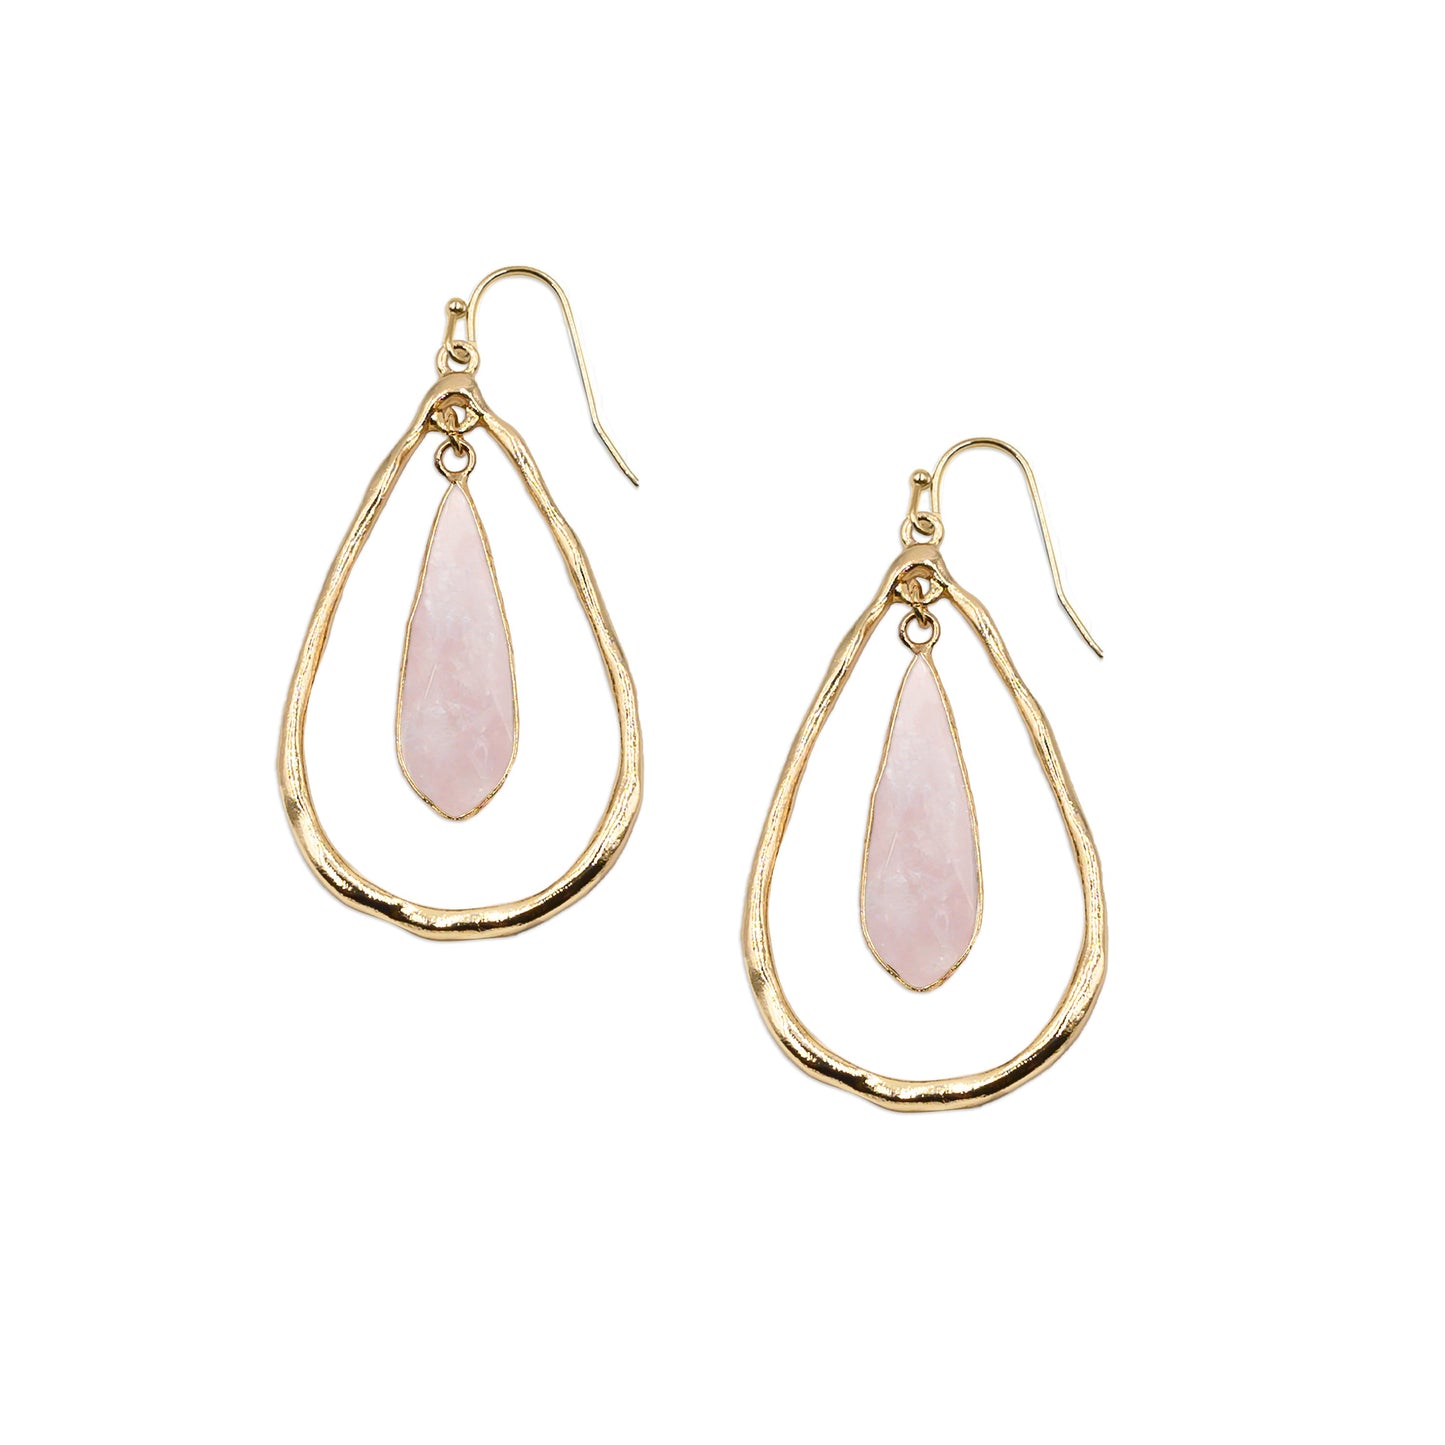 Zuri Collection - Ballet Earrings